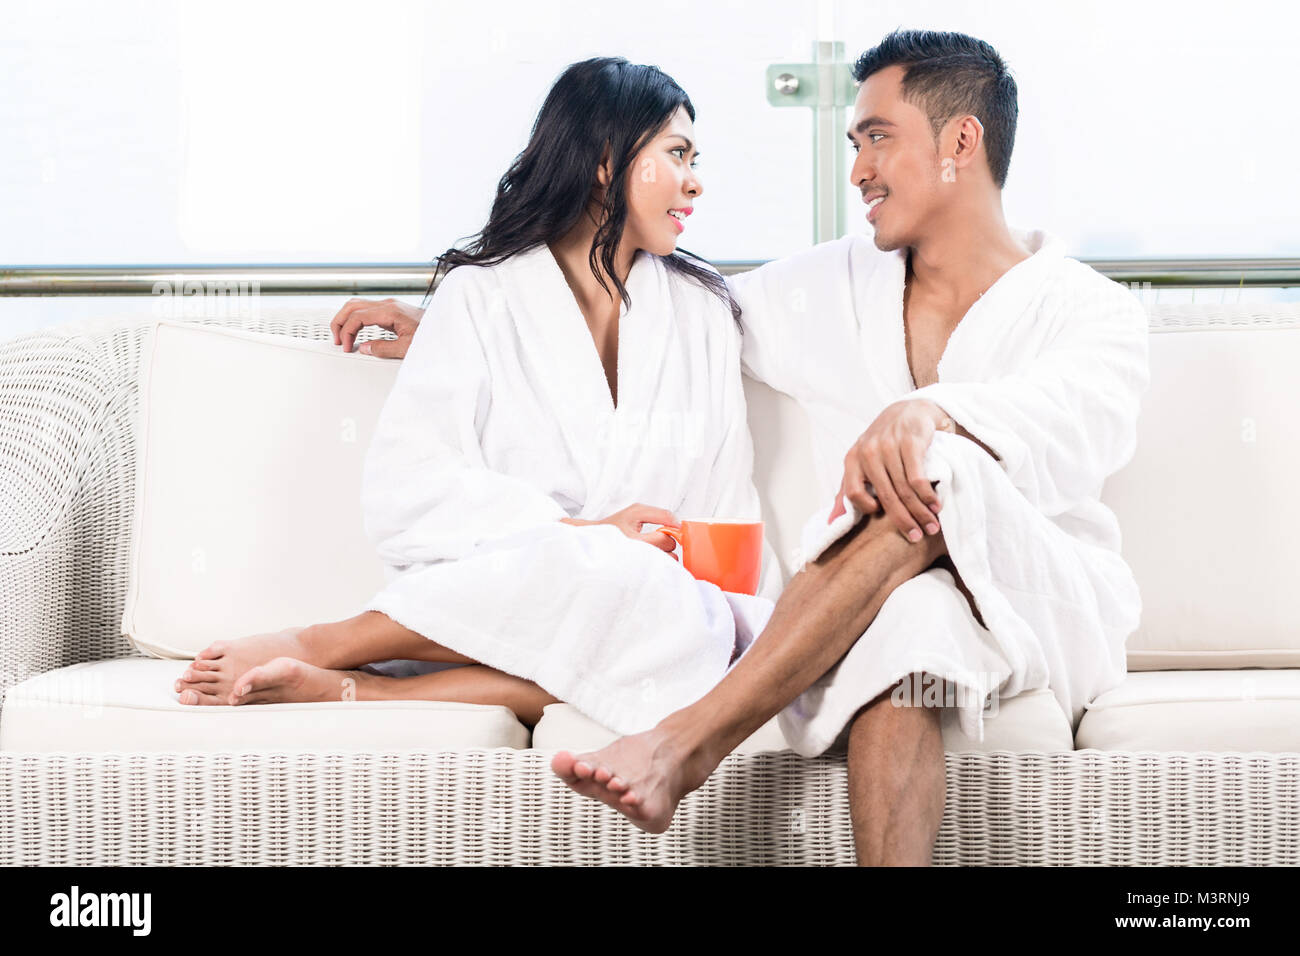 Couple in morning sitting on couch Stock Photo